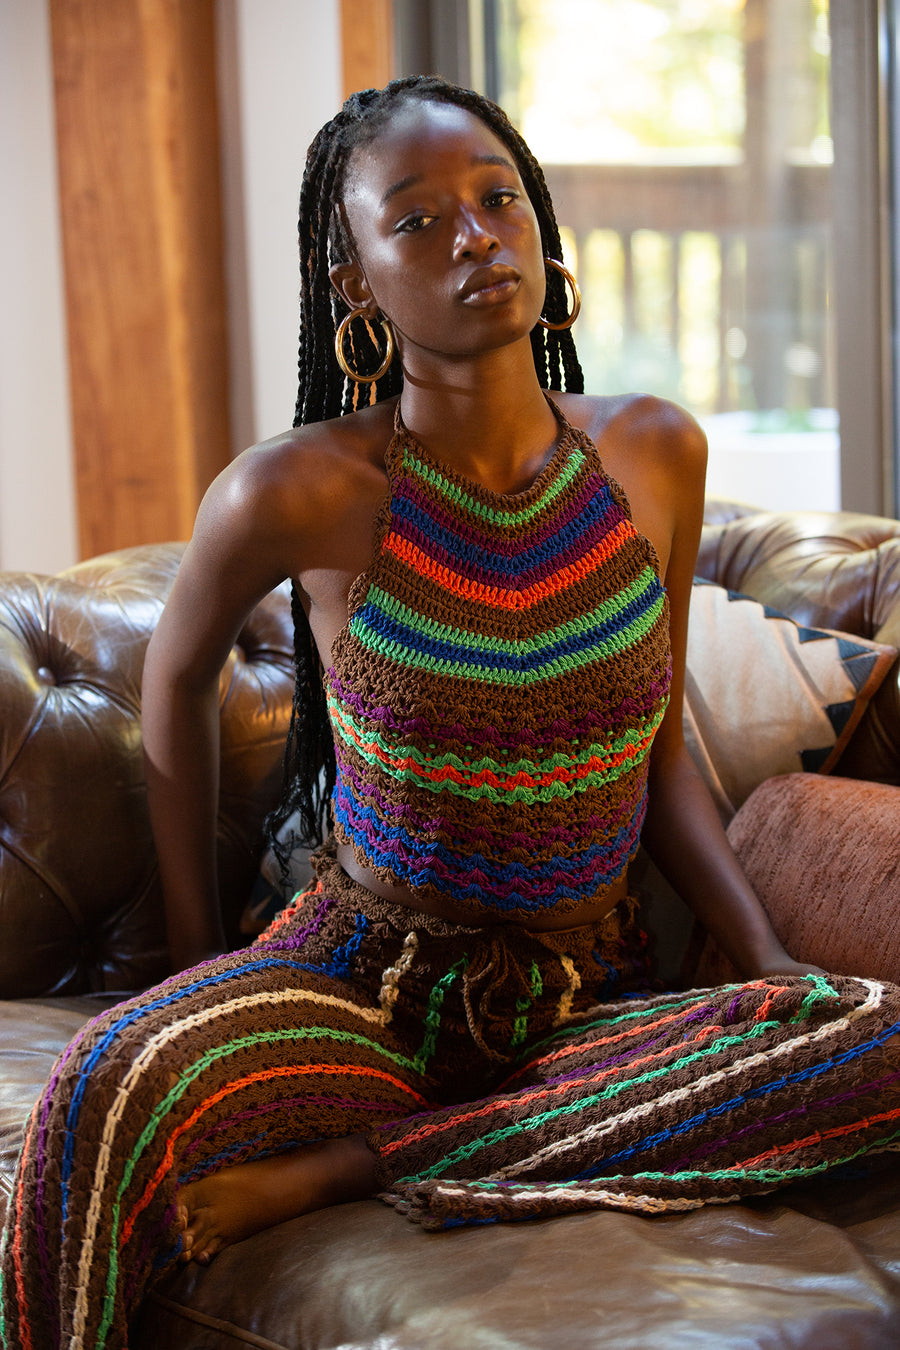 This is a photo of a woman wearing a colorful, high neck, knit crop top.